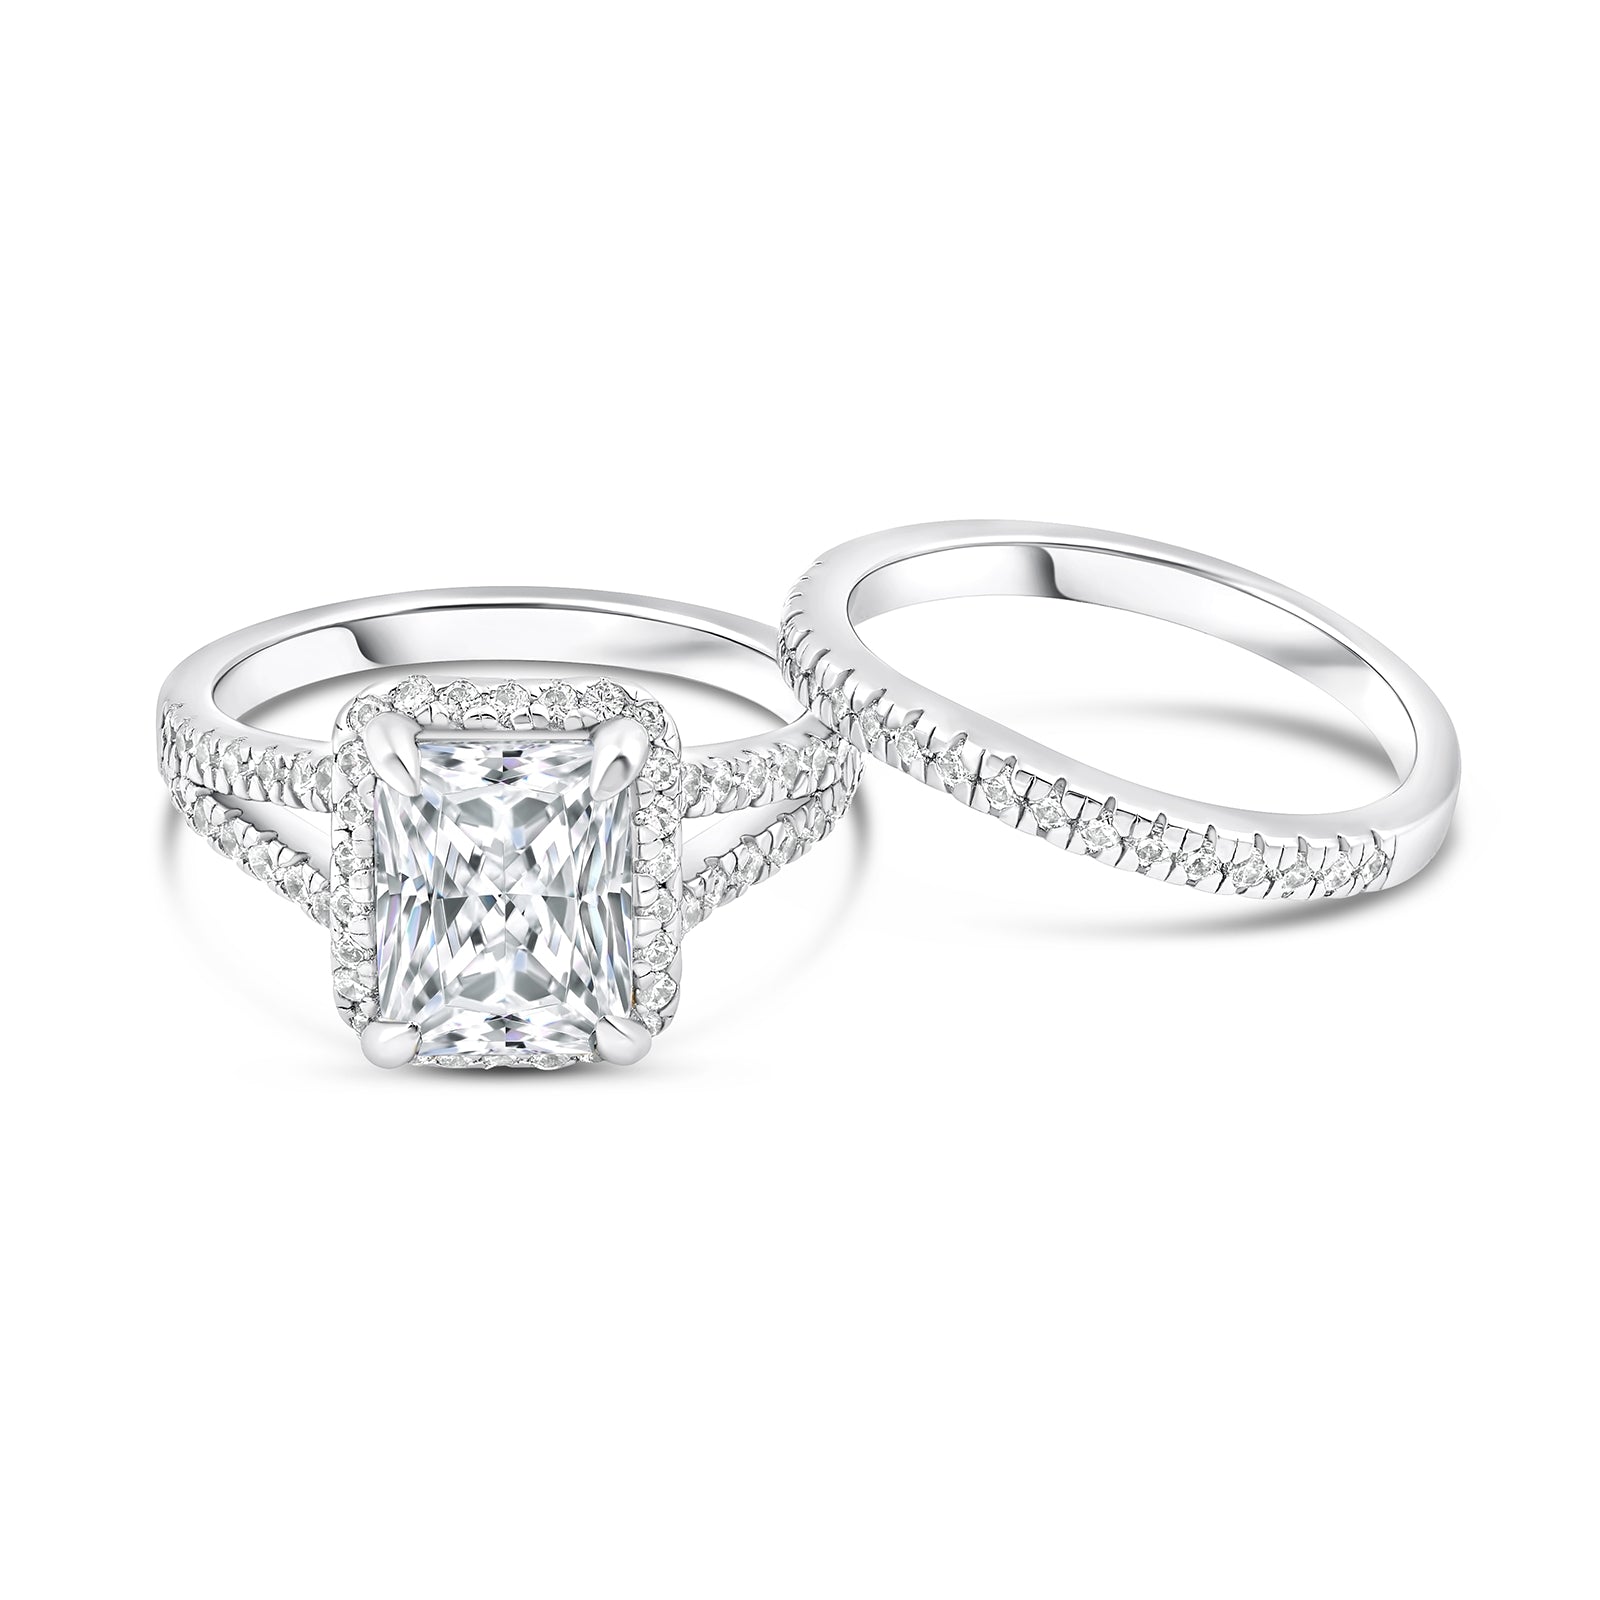 silver radiant cut engagement ring with matching half eternity band to its side